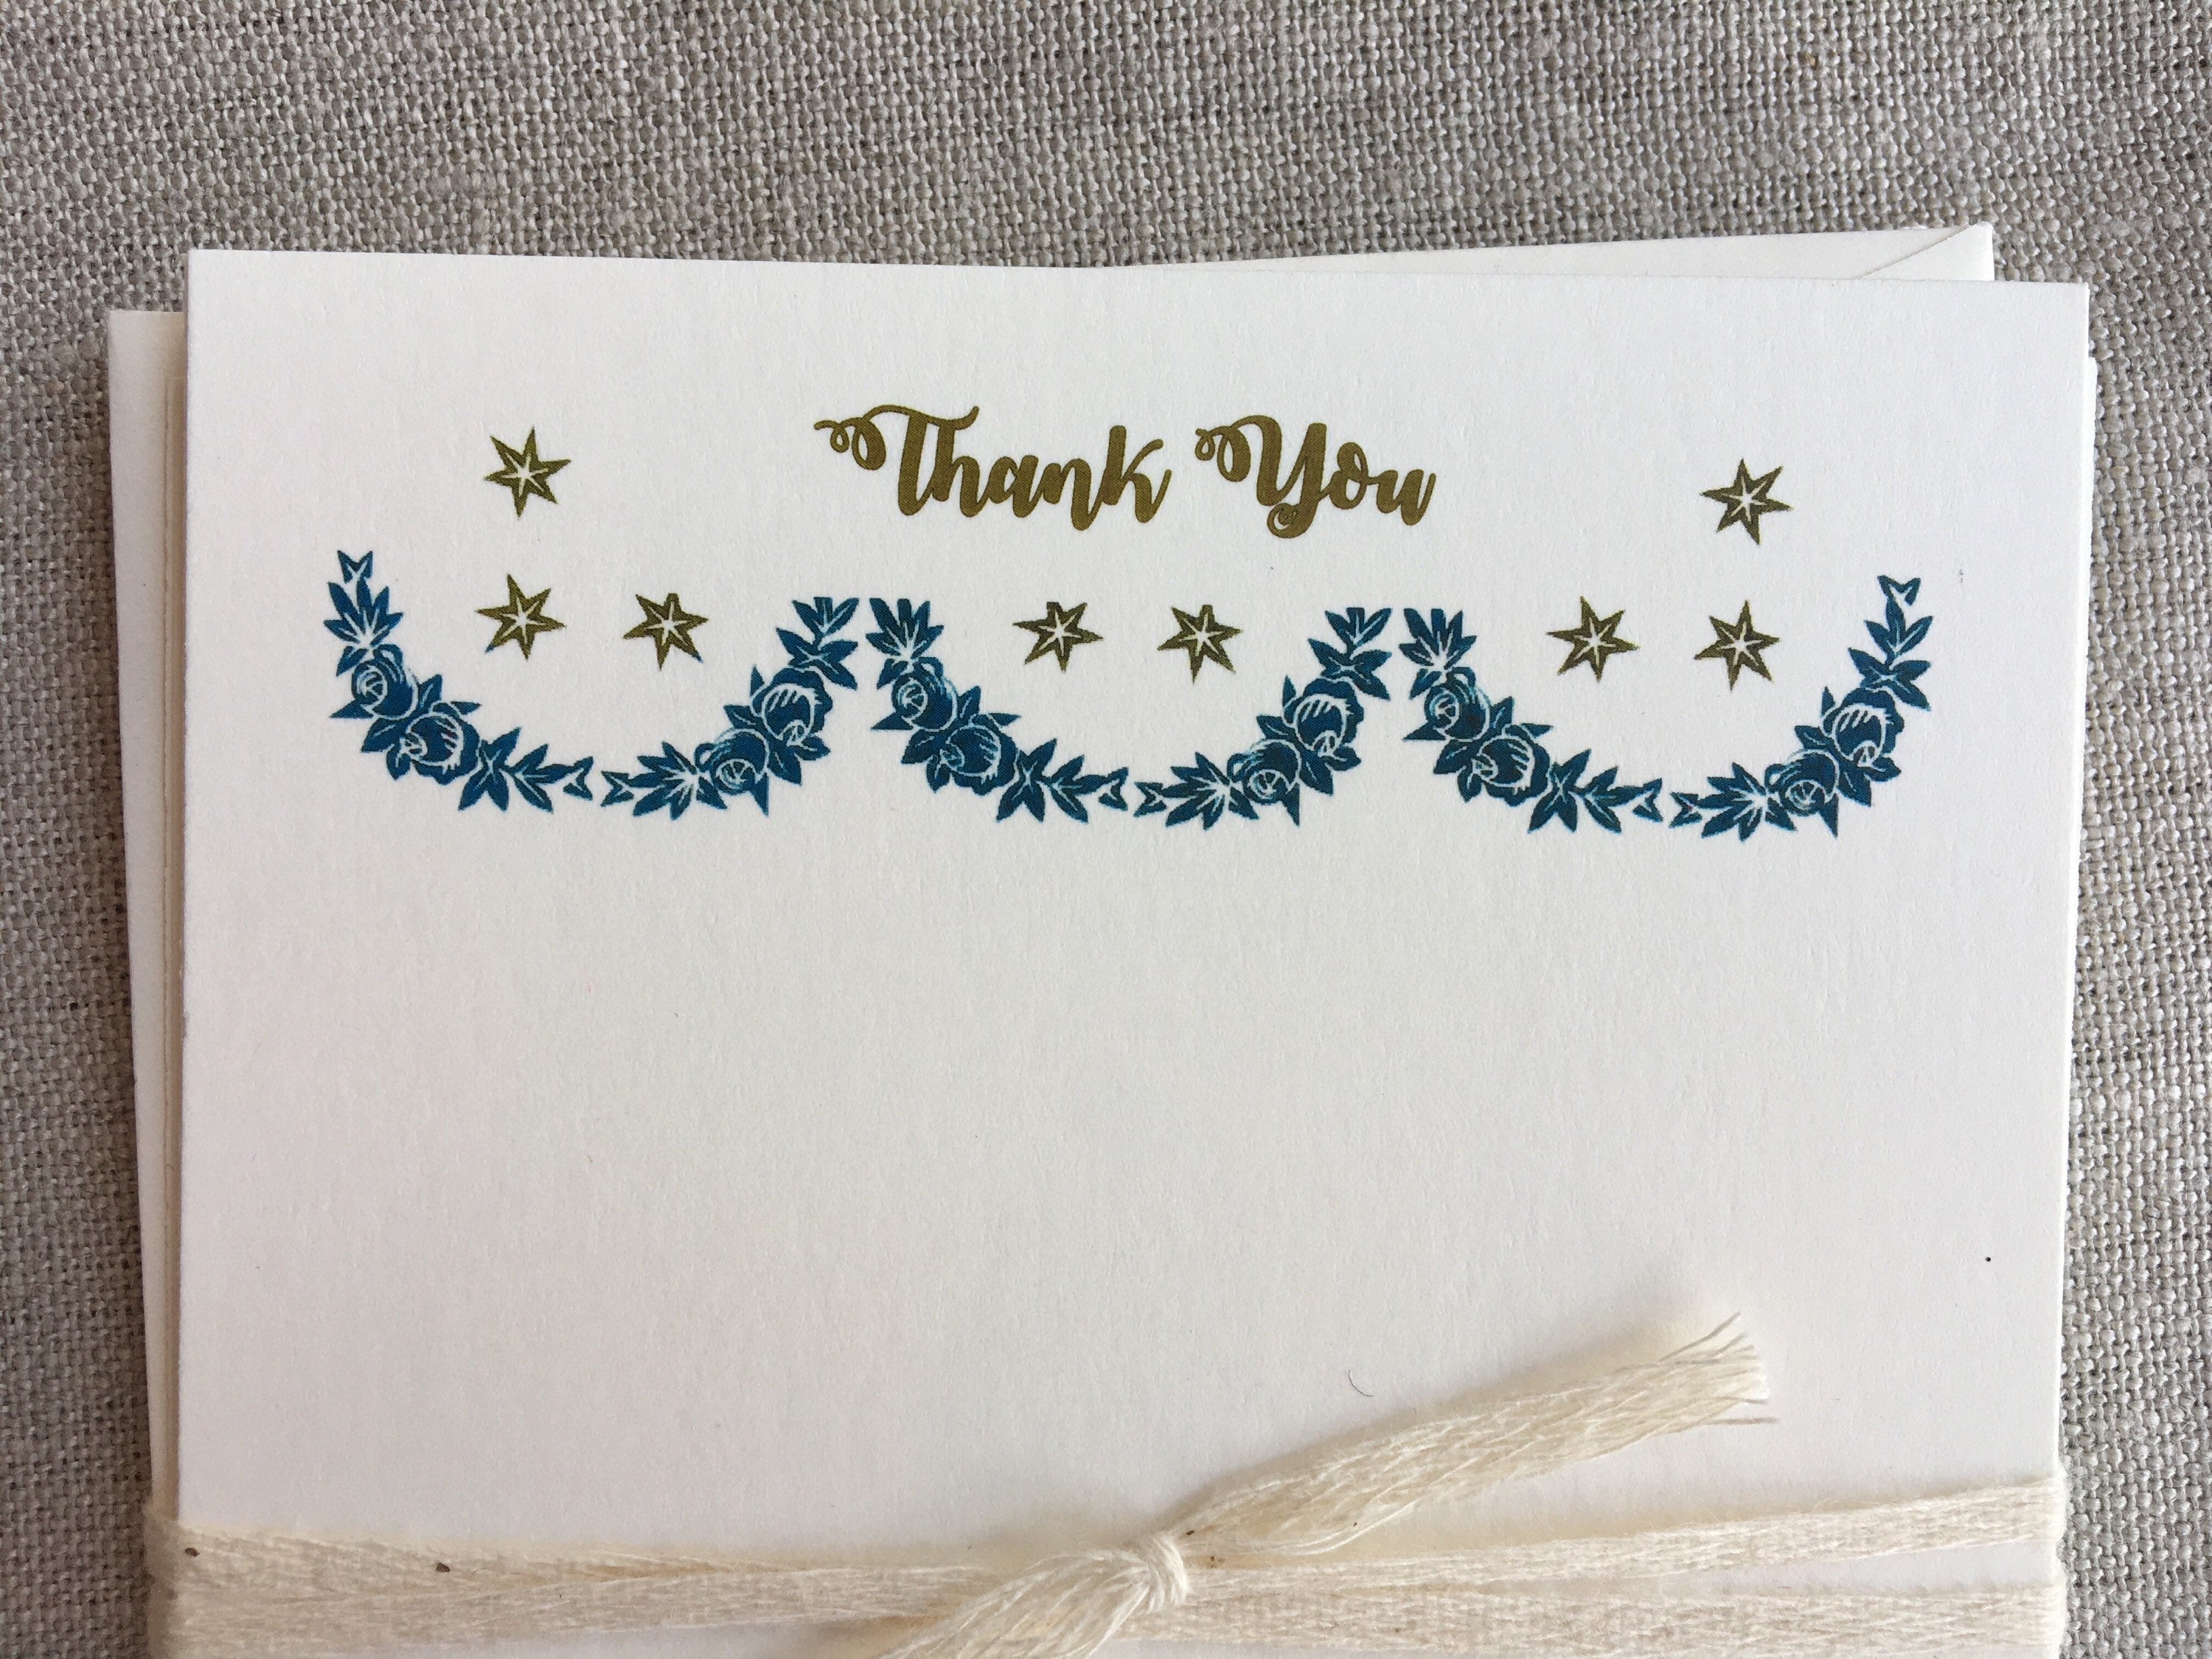 Set of 6, Hand Printed 'Thank You's', Festoon and Star Stationery, A2 Flat Cards with Matching Envelope - PARCEL